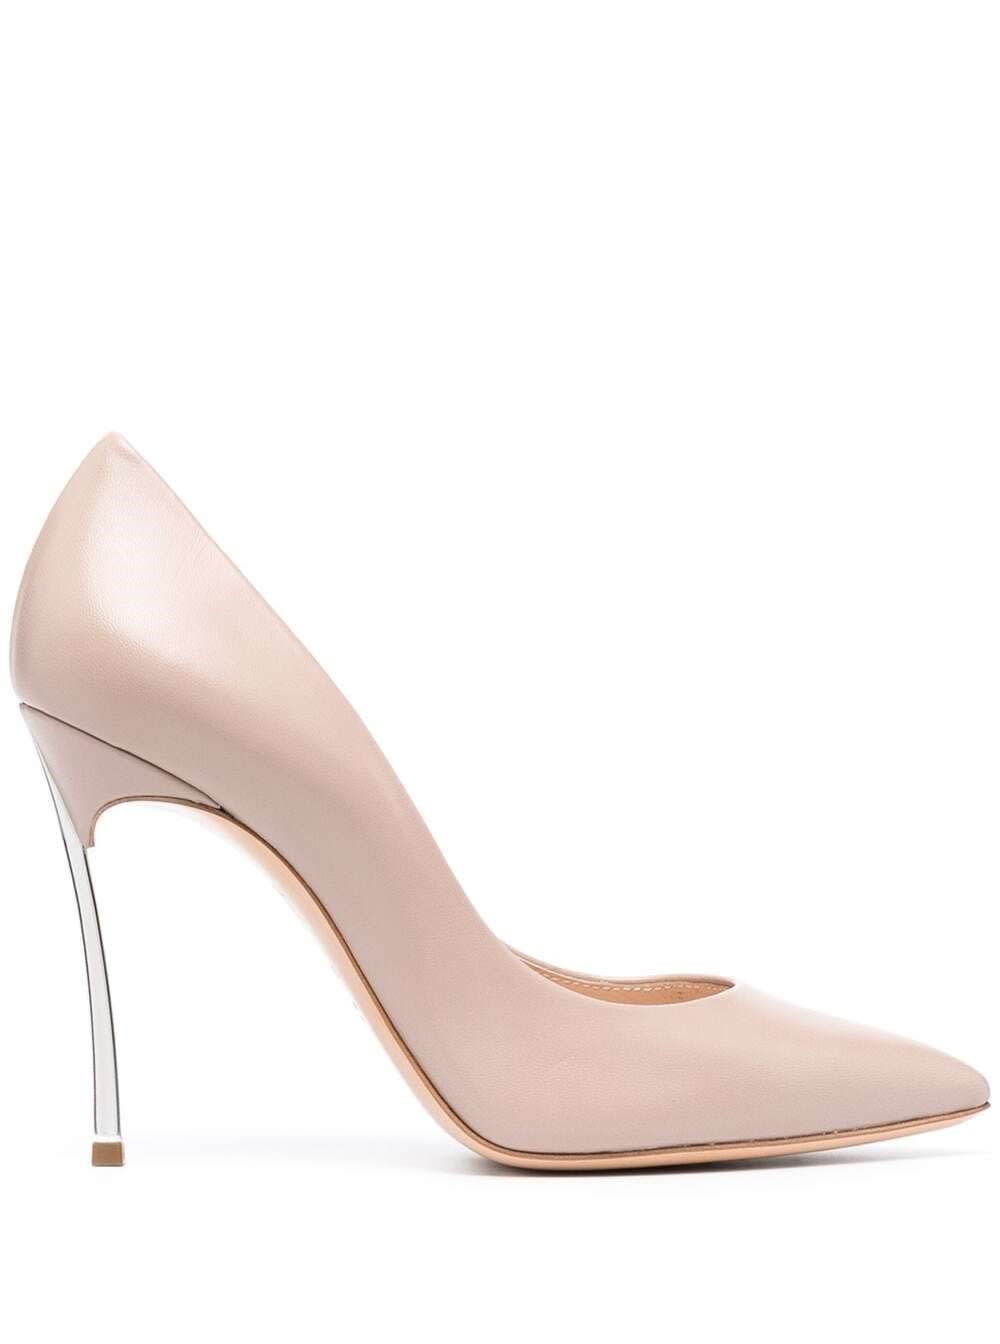 Casadei Blade Jolly Pumps In Pink Leather